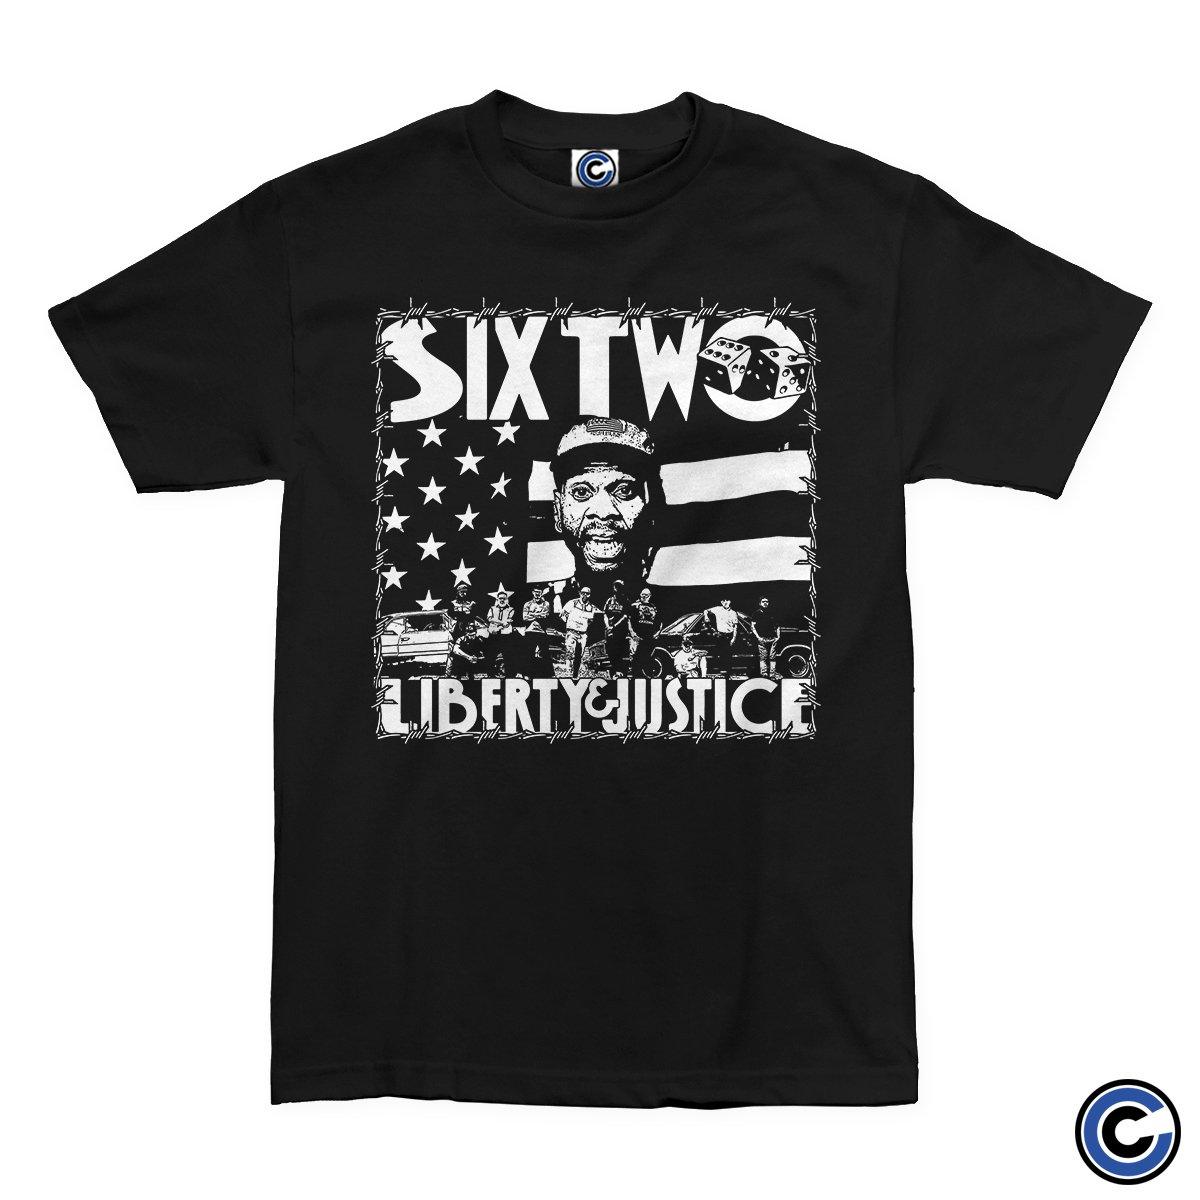 Buy – Liberty And Justice "Six Two" Shirt – Band & Music Merch – Cold Cuts Merch